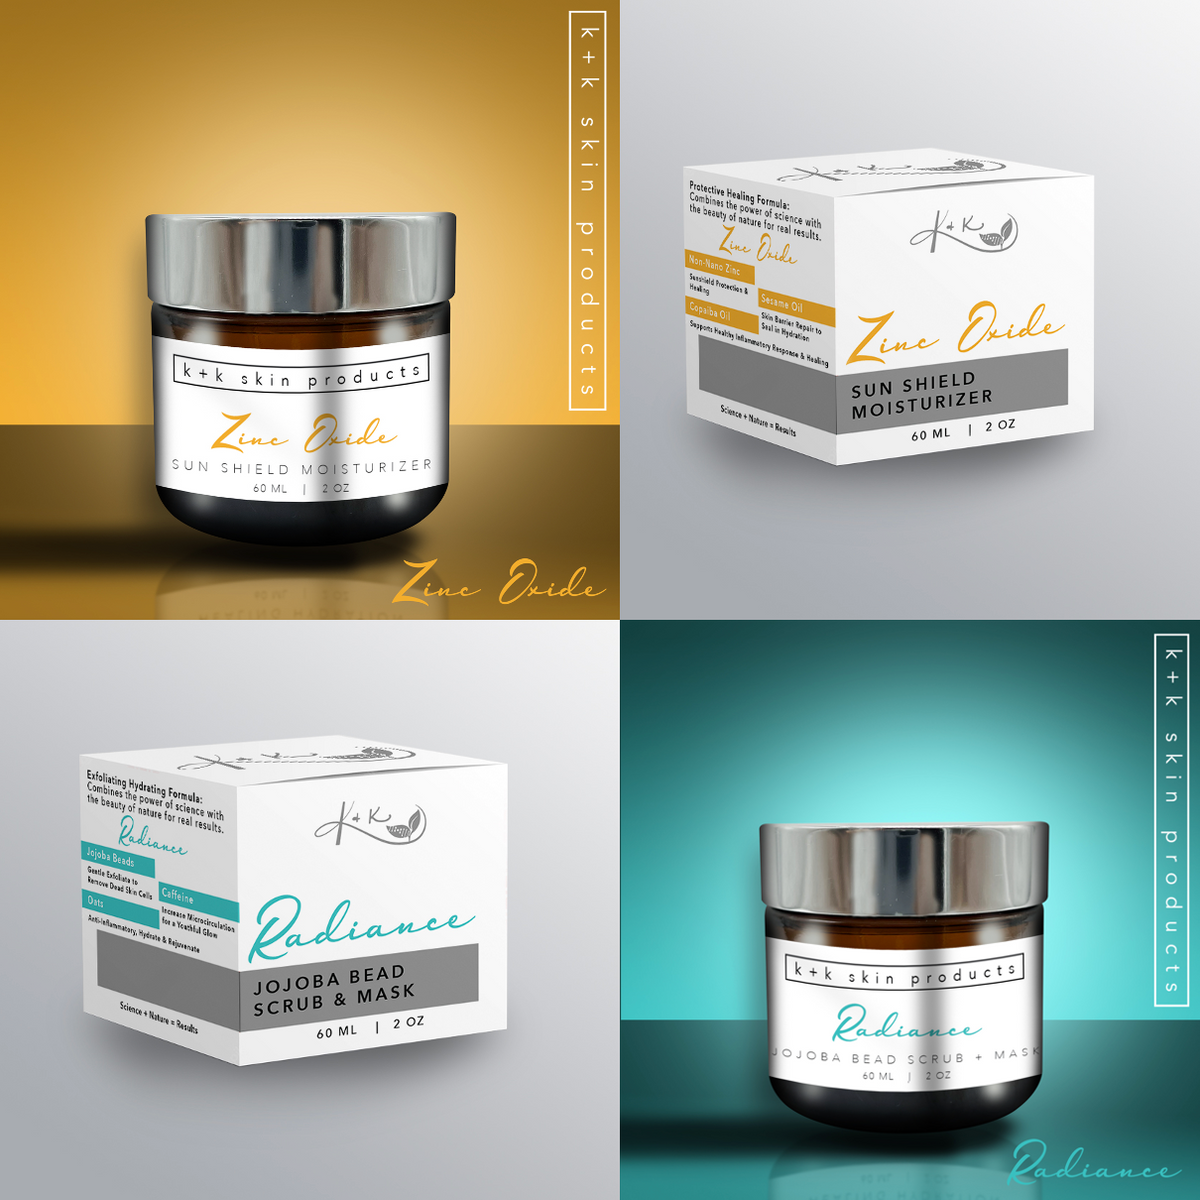 Glow & Protect System by K&K Skin Products